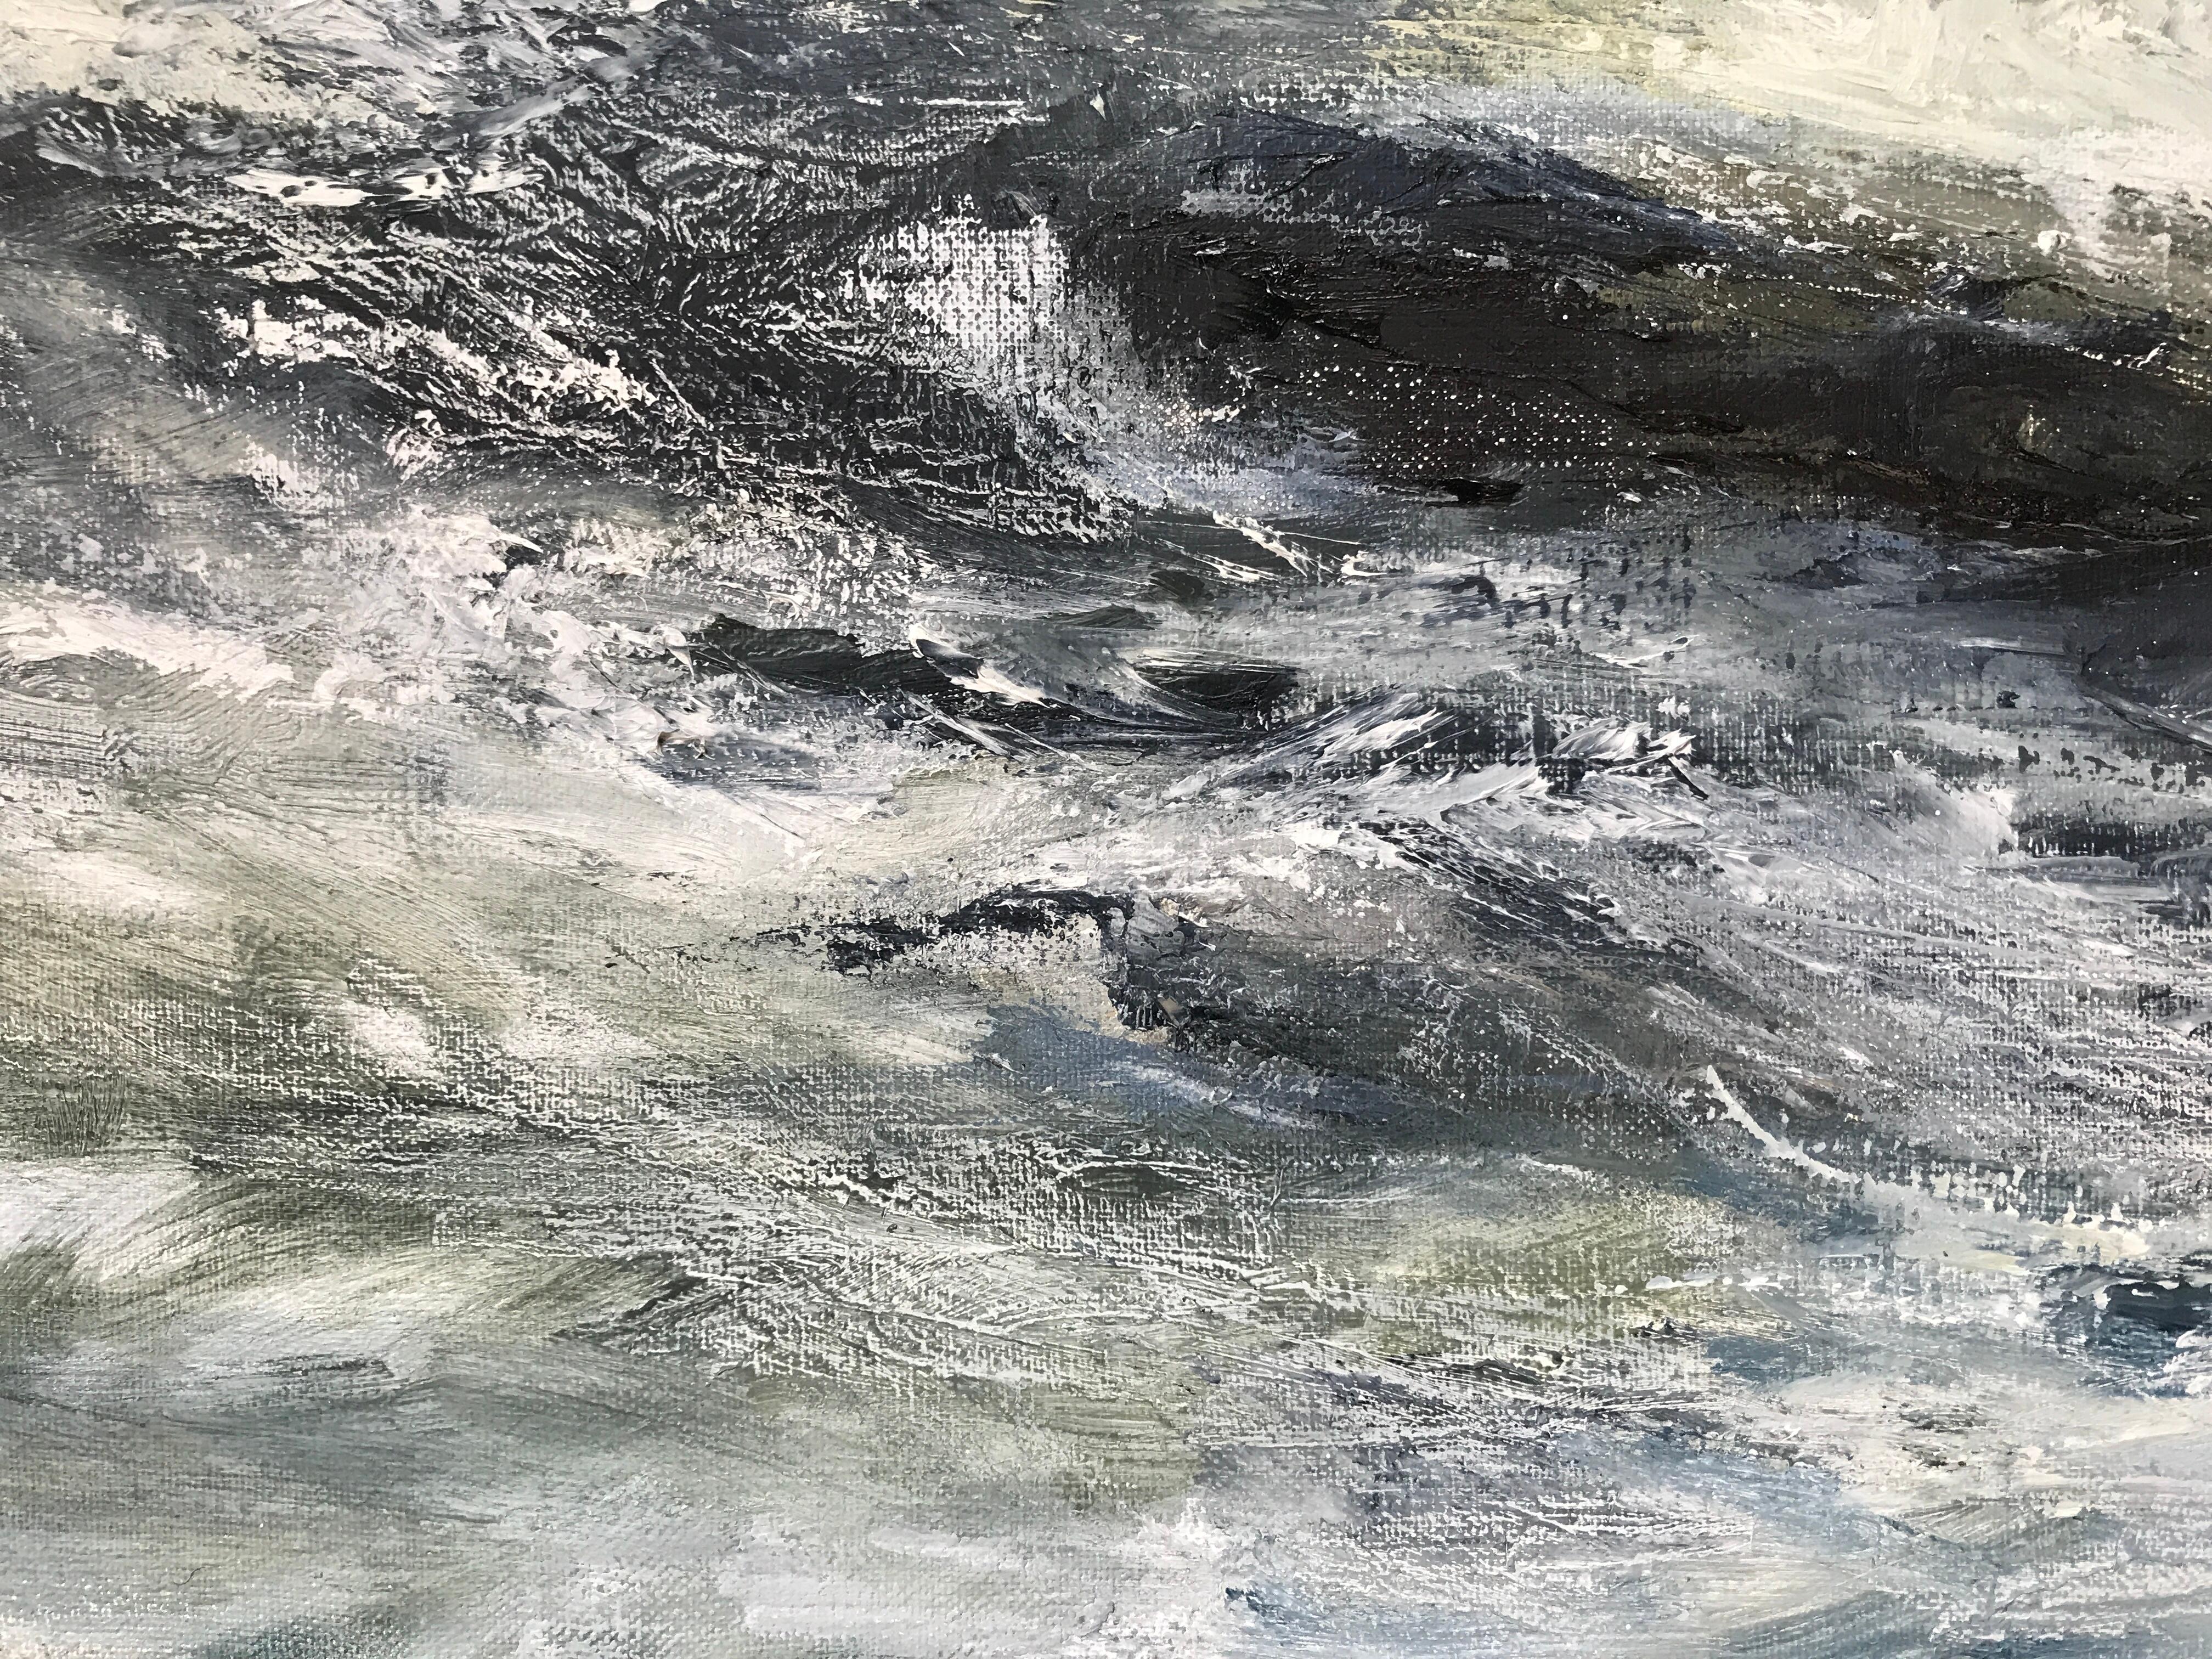 An original oil painting of stormy seascape. In the foreground, waves are crashing into eachother, forming splashes of water which almost reach the white seagulls flying above them. 

ADDITIONAL INFORMATION:
What Lies Beneath the Salt is Fiction by